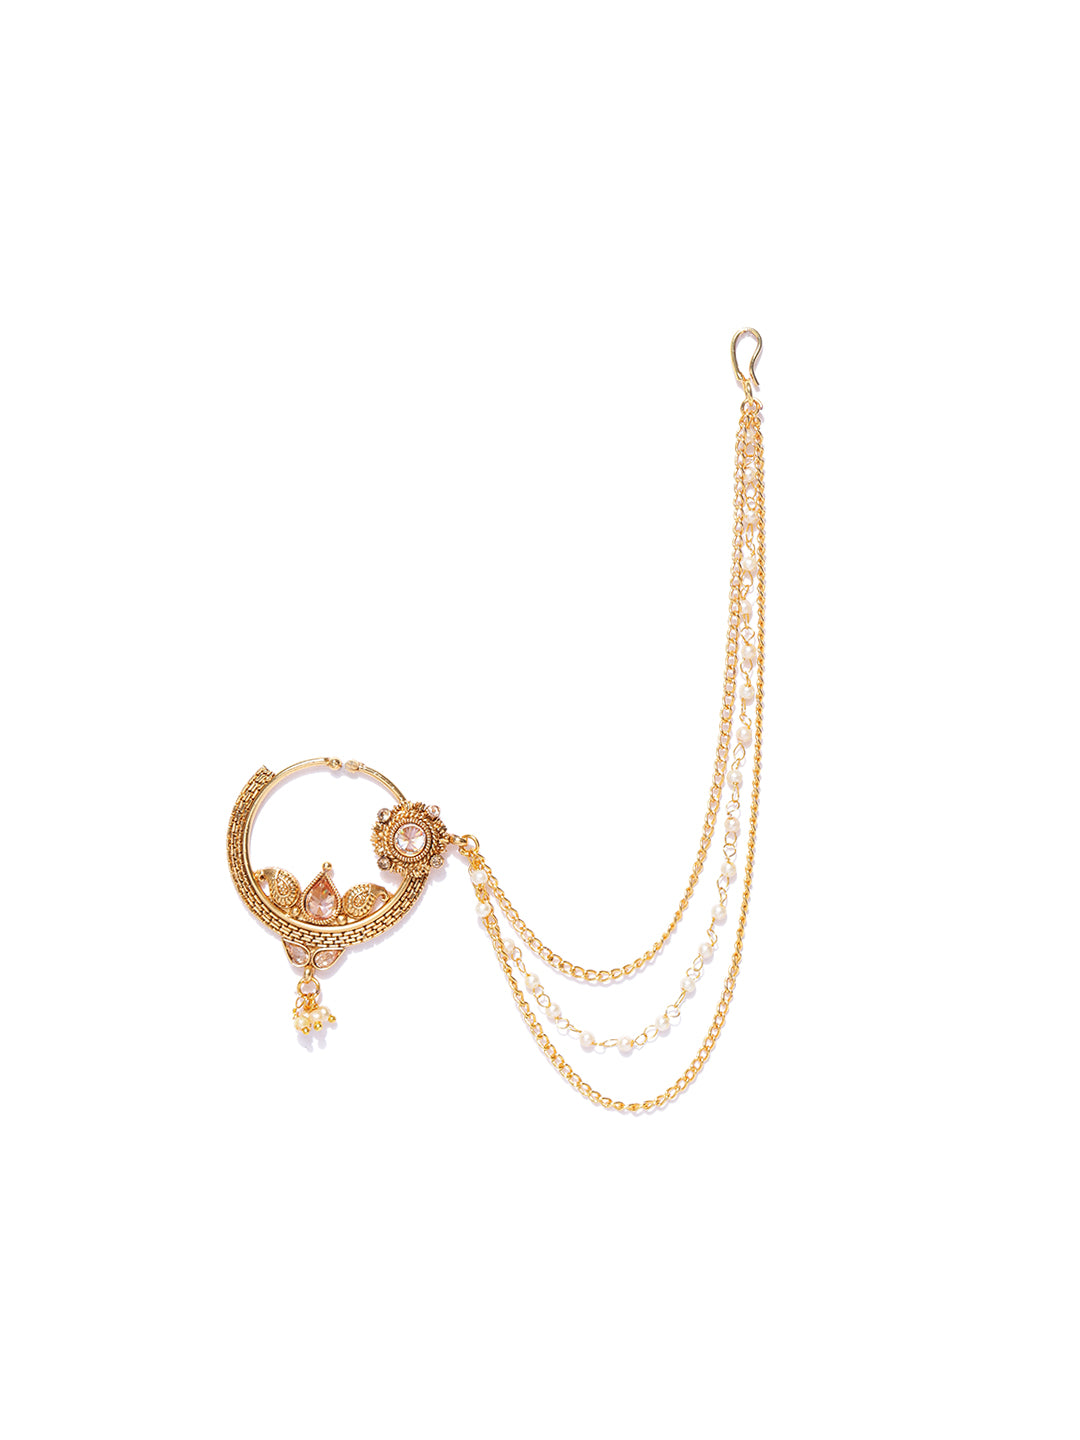 Traditional Gold Plated NoseRing/Nath With Pearl Chain For Women And Girls